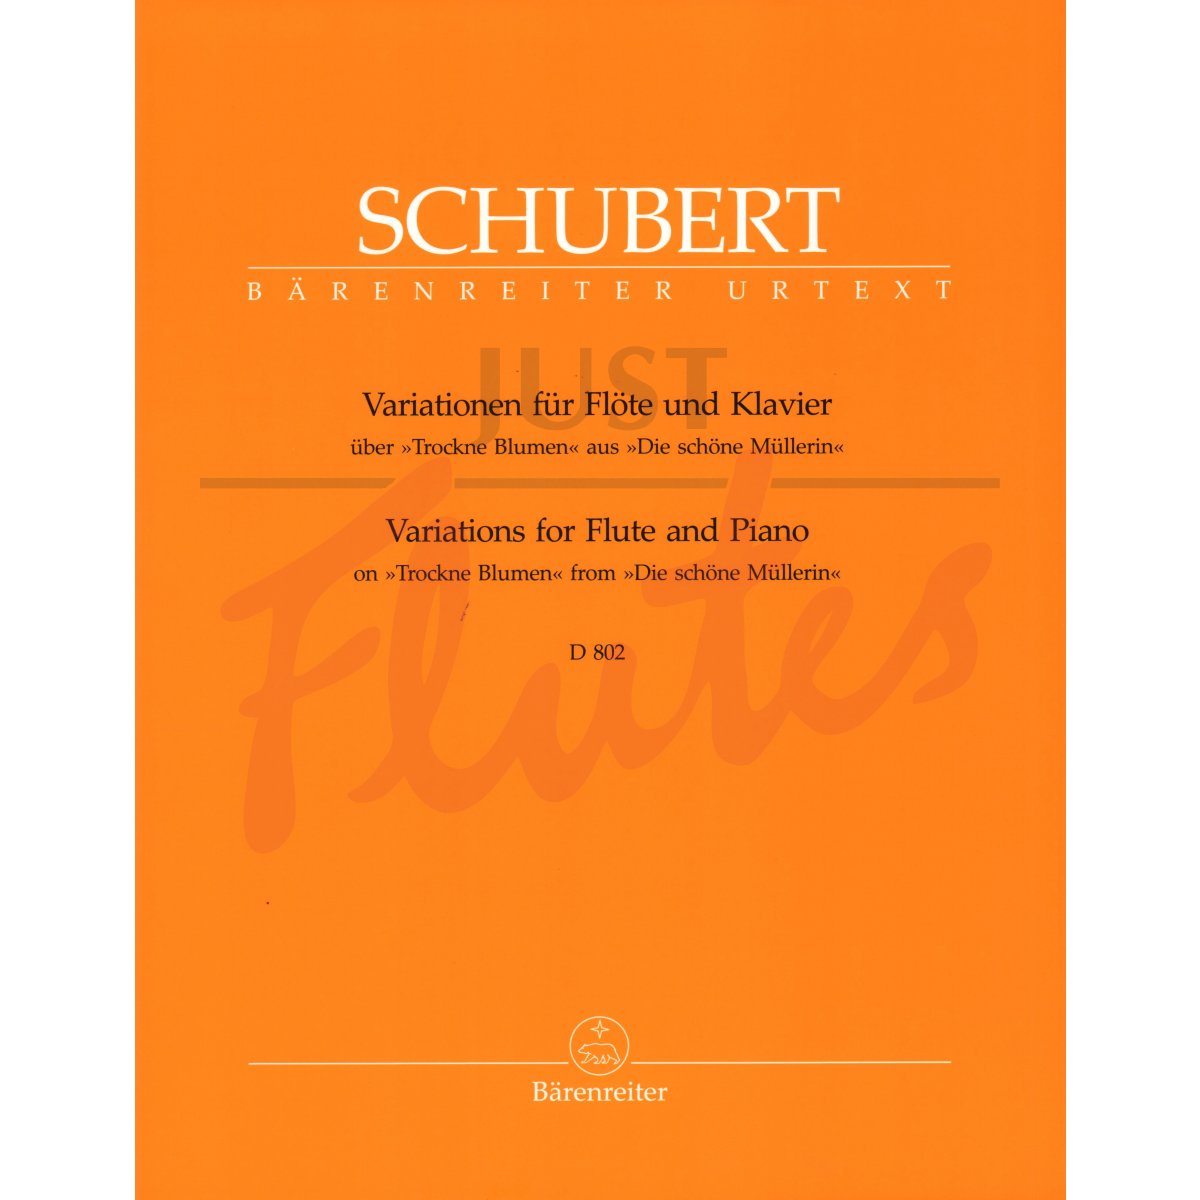 Introduction and Variations on &#039;Trockne Blumen&#039; for Flute and Piano